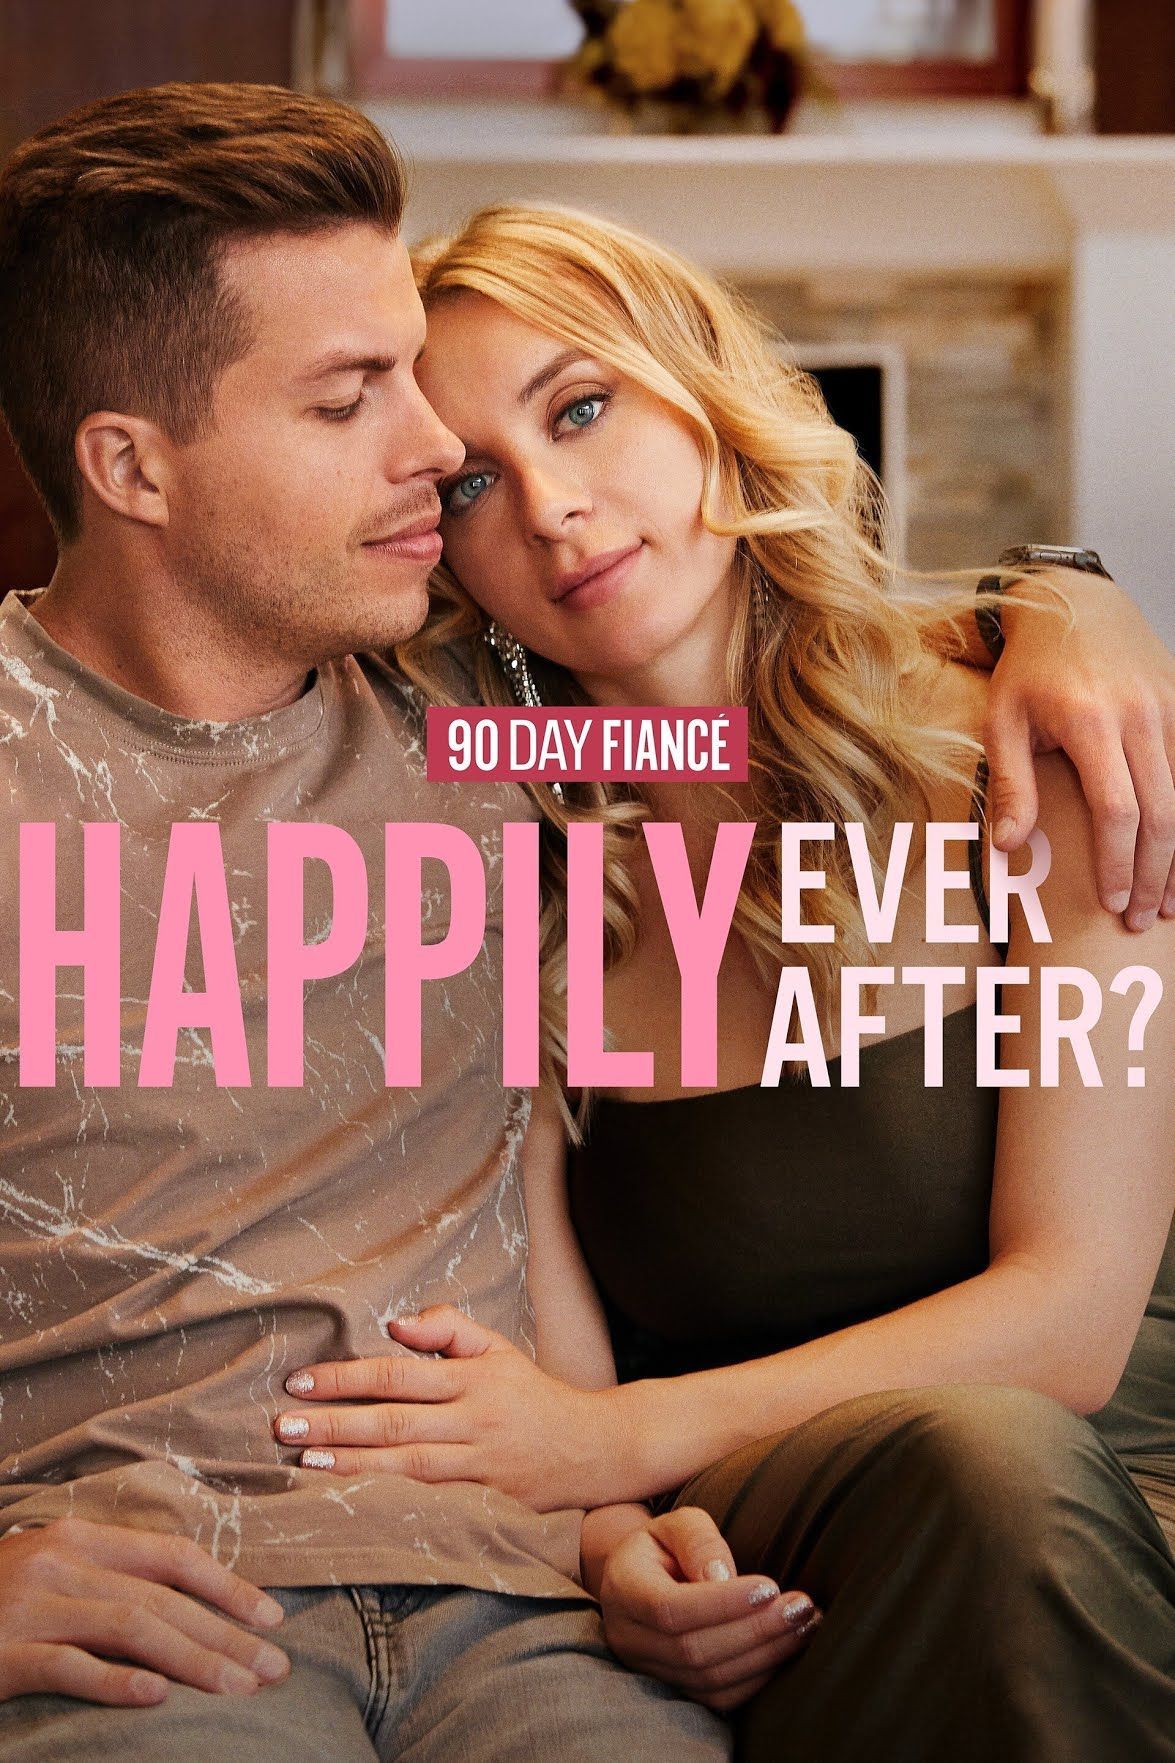 90 day fiance happily ever after tv show poster